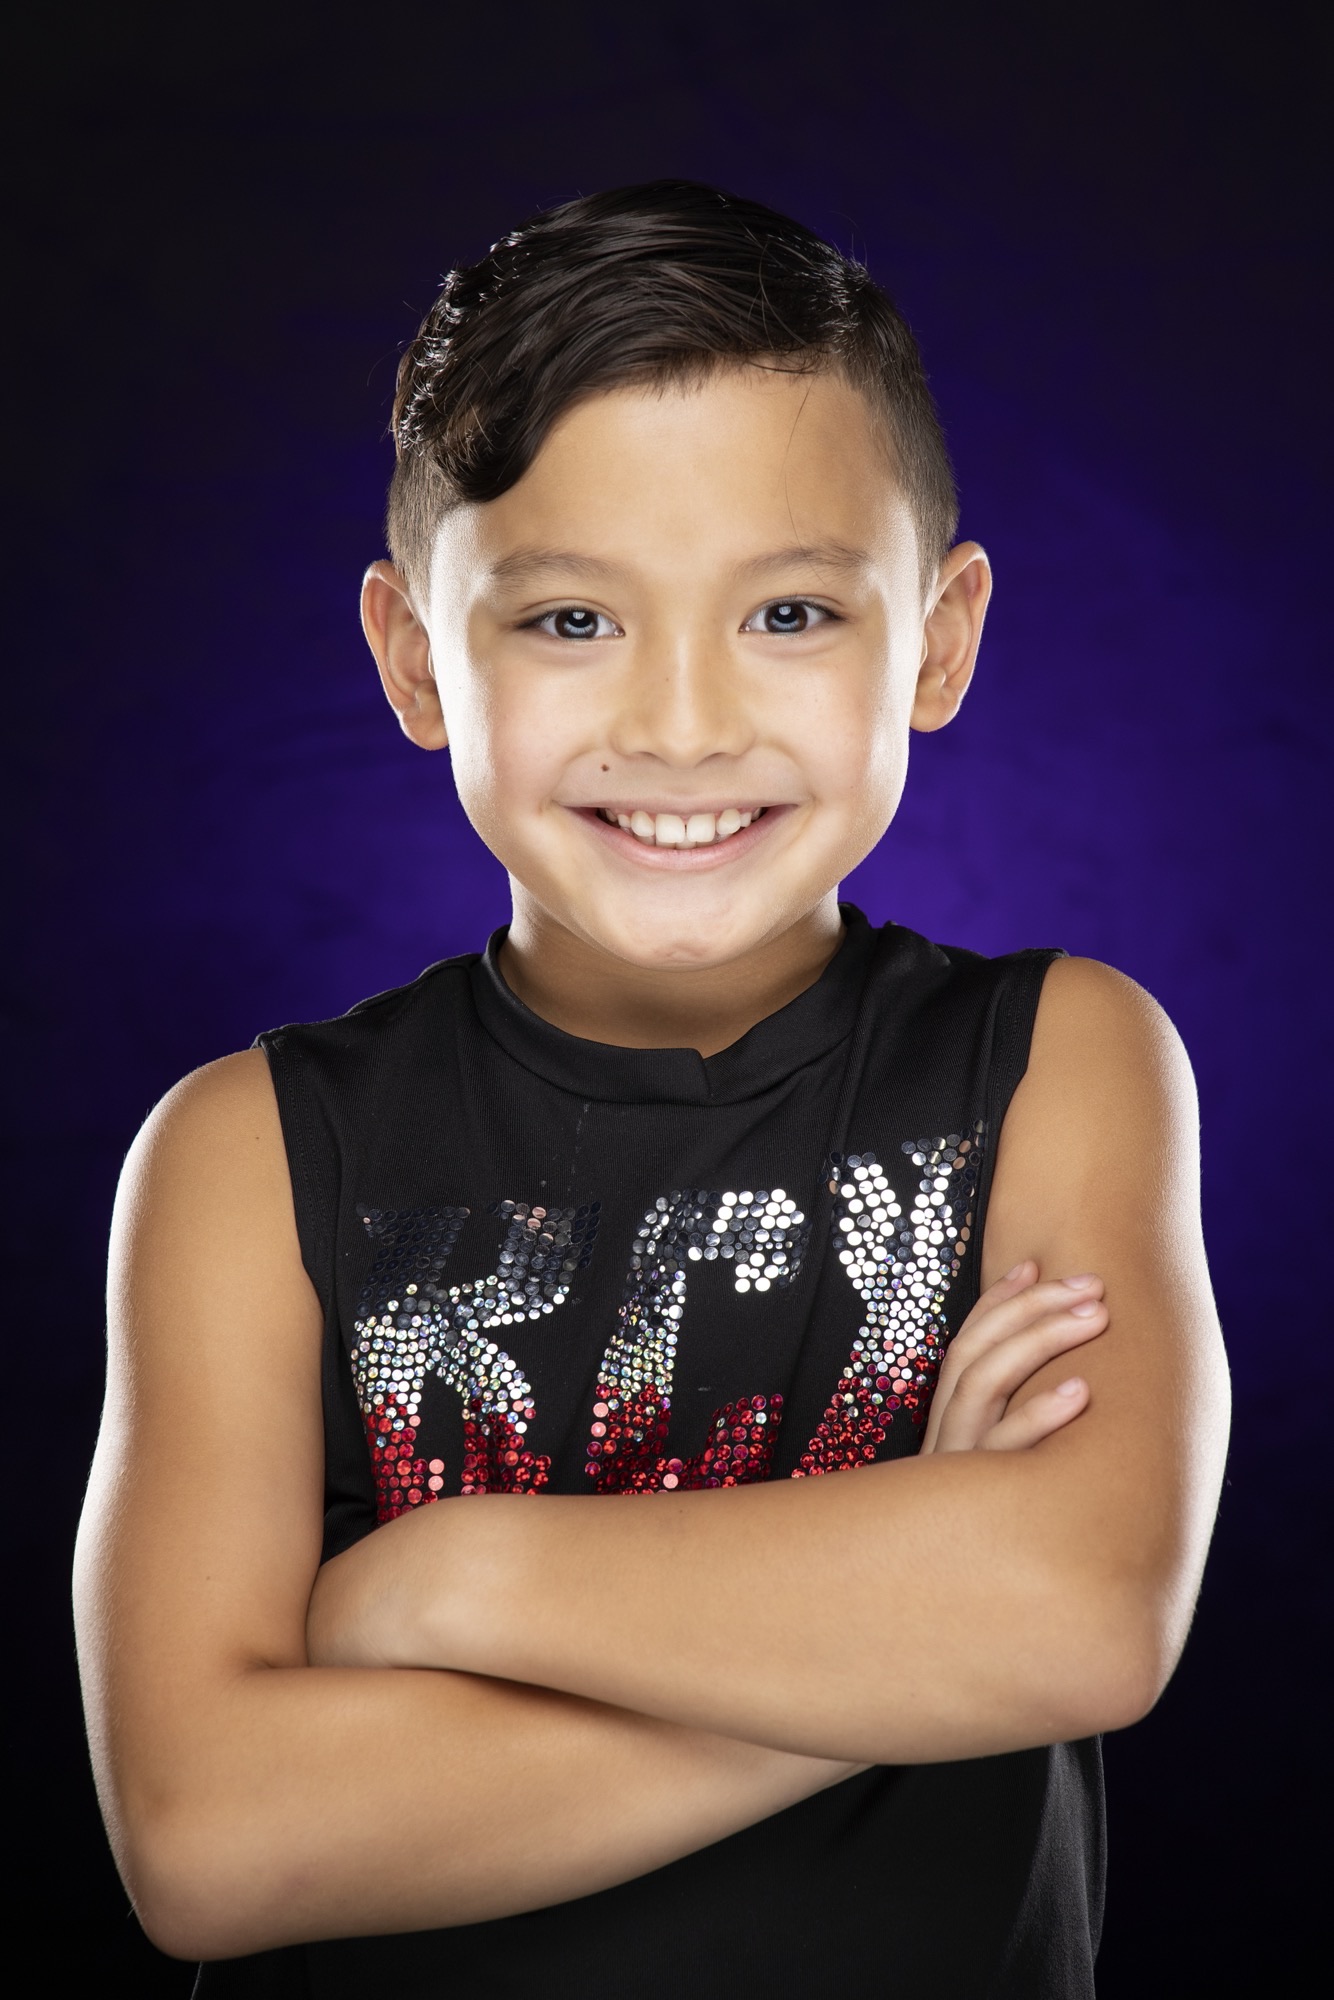 CHECK OUT THE SHINE ON OUR SPOTLIGHT CHEERLEADER RODOLFO CIPRIANO